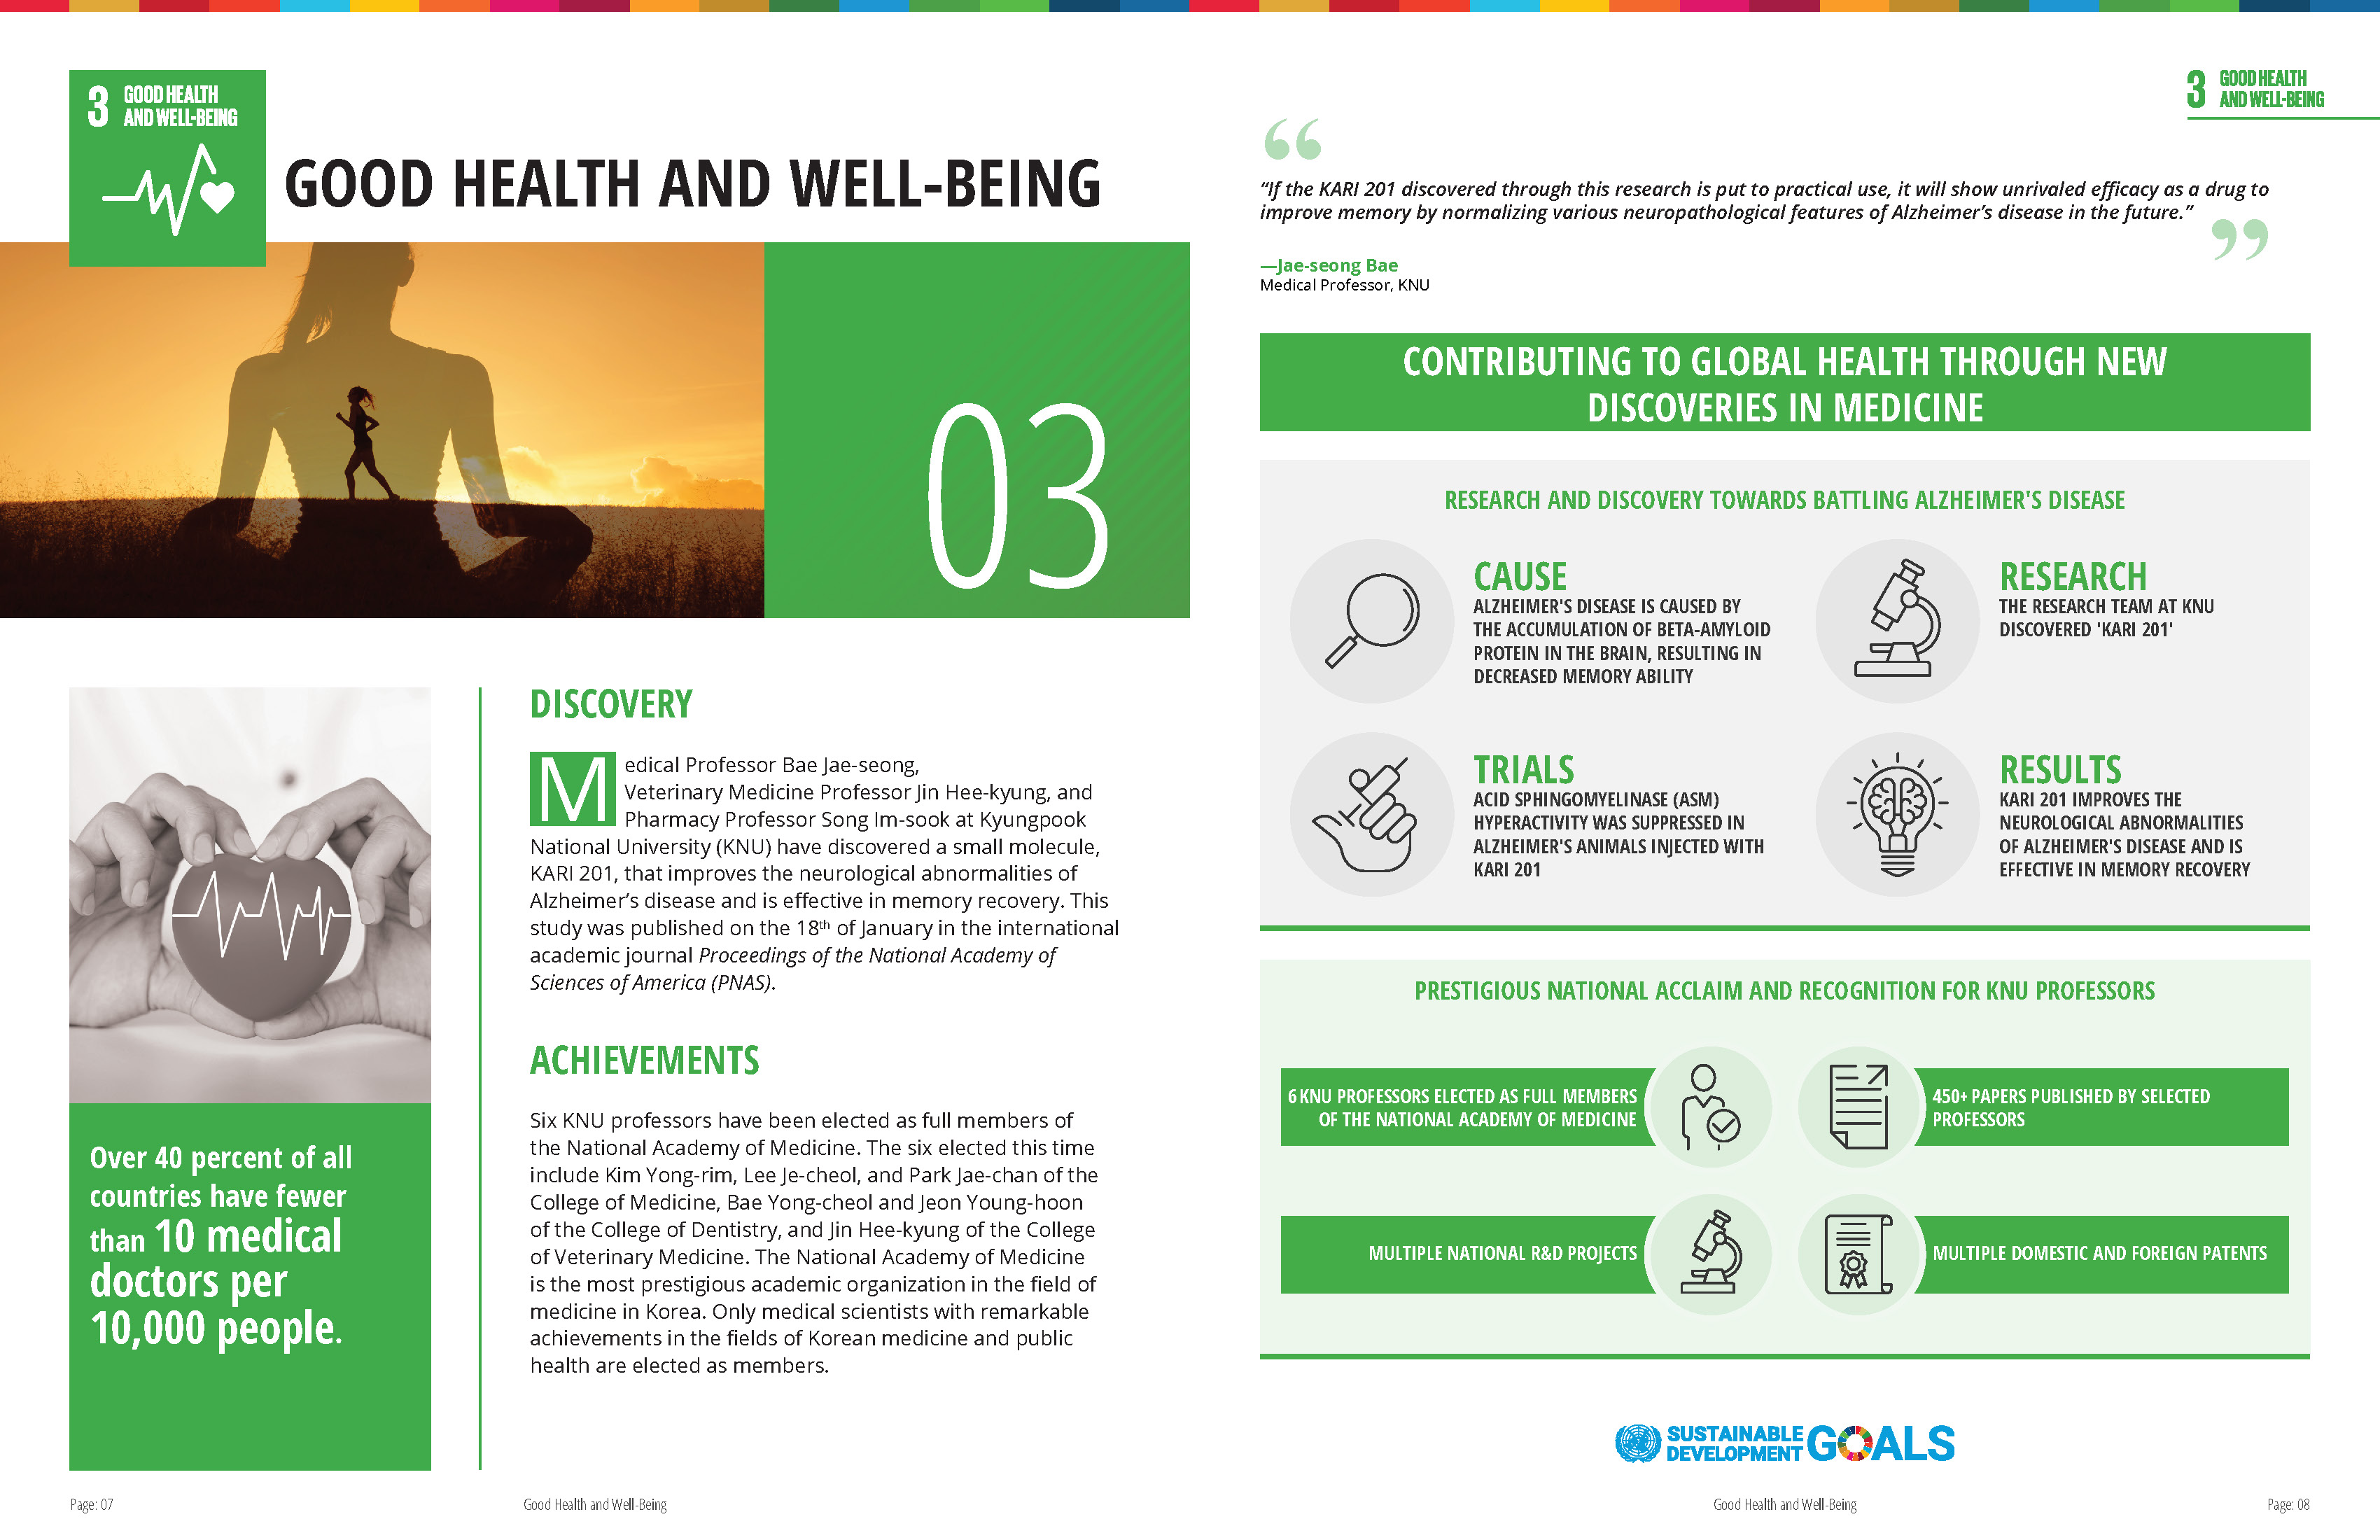 [SDG3 Good Health and Well-Being] 2021-2022 Kyungpook National University SDG Report 관련 이미지입니다.